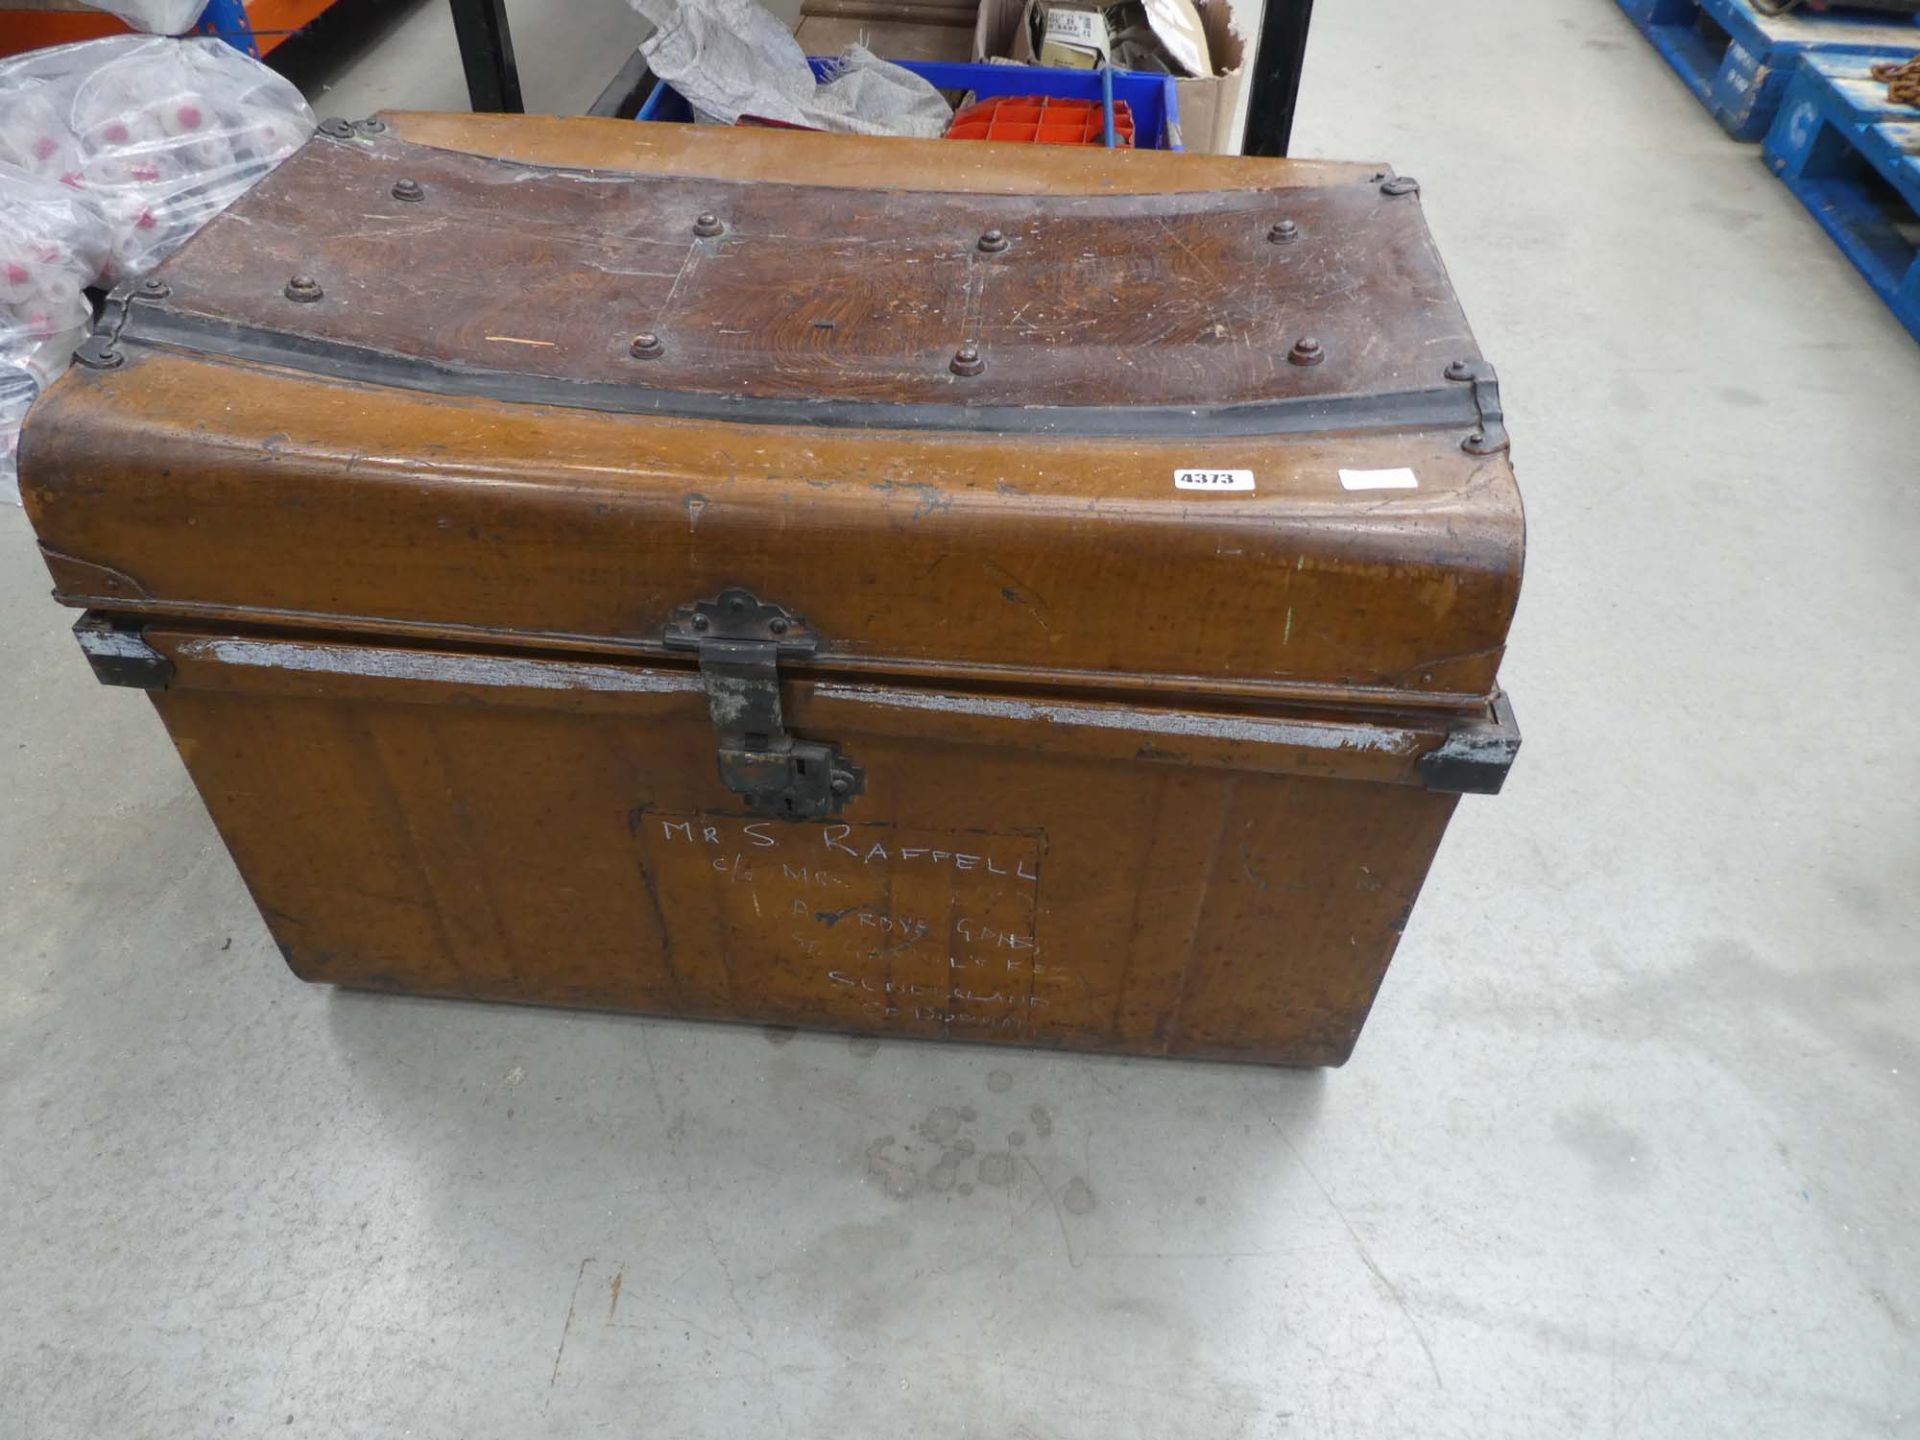 Metal vintage trunk containing various tools, hobby craft items etc - Image 2 of 2